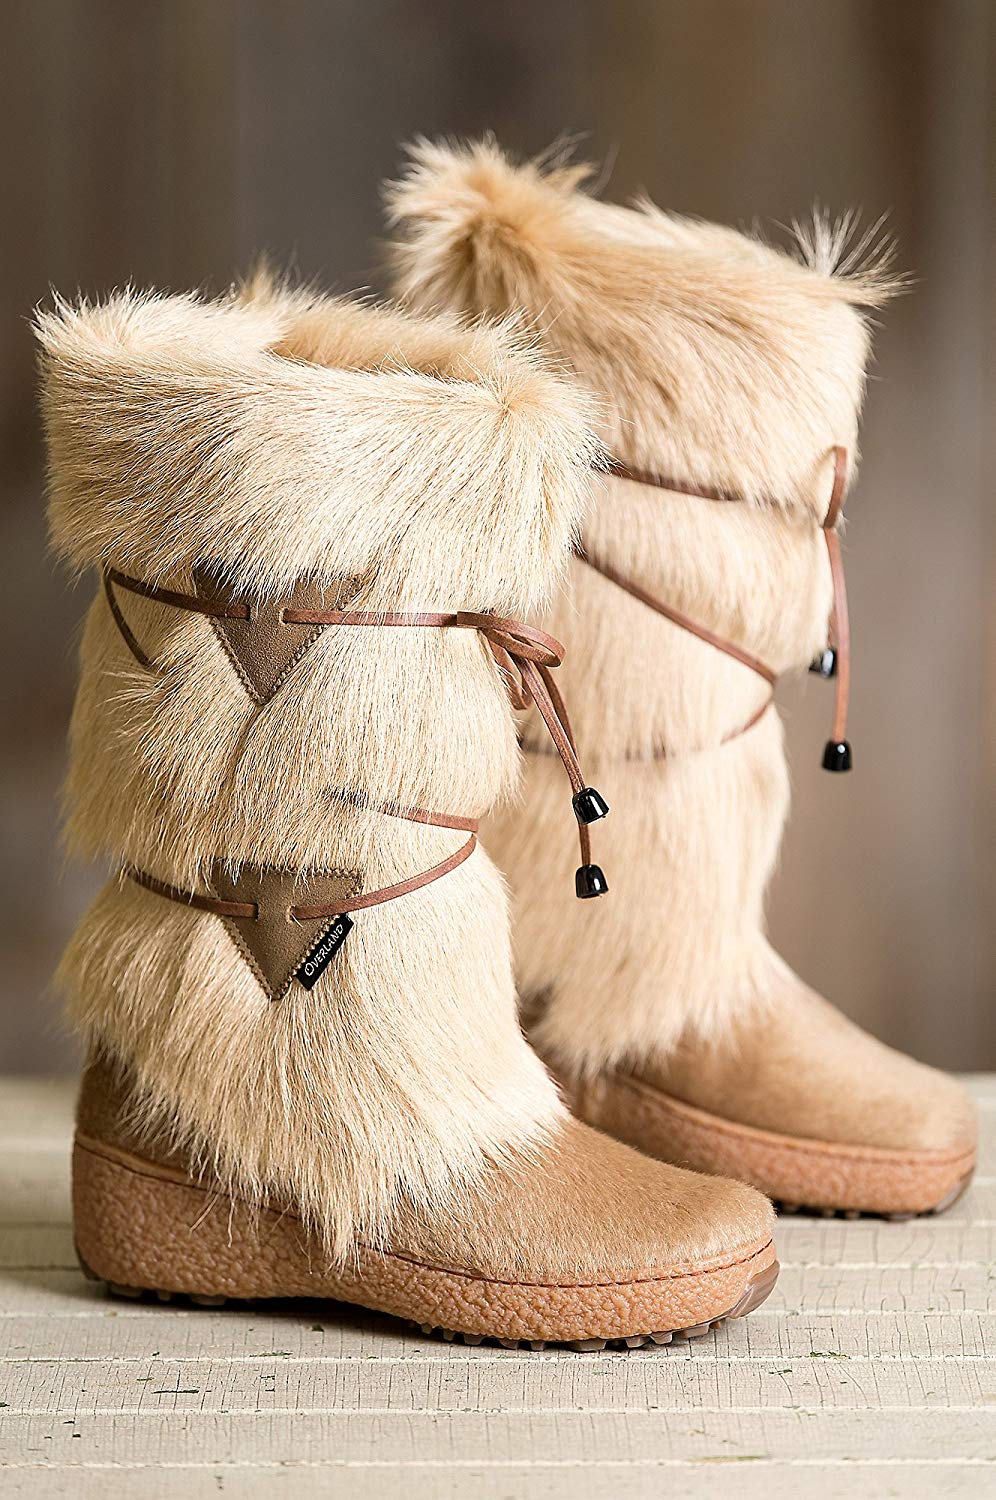 best mens winter boots, best snow boots, best winter boots, warm winter boots, best women's snow boots, best mens snow boots, best winter boots for women, warmest womens winter boots, best women's snow boots 2016, winter boots 2017, good winter boots, best cold weather boots, best winter hiking boots, best mens winter boots 2016, best womens winter boots, best winter hiking boots women's, best winter shoes, good snow boots, warmest womens snow boots, warmest winter boots in the world, best mens winter boots 2017, best womens snow boots, warmest boots, best women's snow boots 2017, women's winter boots 2017, winter boot brands, extreme cold weather boots, comfortable winter boots, lightweight snow boots, lightweight winter boots, best waterproof winter boots, best snow hiking boots, mens winter boots 2016, alaskan winter boots, best snow boot brands, best winter boot brands, best winter snow boots, best winter boots 2016, warm boots, womens snow boots, women's winter hiking boots, best winter walking boots, good winter boots mens, warmest boots in the world, snow hiking boots, winter hiking boots, good winter boots womens, popular winter boots, warm waterproof winter boots, best pac boots, best boots for snow and rain, best waterproof snow boots, mens winter boots 2017, best boots 2017, best women's cold weather boots, warm boots mens, winter boots for women, warm boots womens, best women's winter boots 2015, best winter boots 2017, top mens winter boots, best cold weather boots mens, womens winter boots 2016, top rated winter boots, best boots for snow and ice, top winter boots, top rated womens winter boots, best women's winter boots 2017, winter boots, best womens waterproof snow boots, chicago winter boots, best winter snow boots for women, winter boot reviews, best women's waterproof winter boots, best women's winter boots 2016, top rated snow boots, mens warm winter boots, warmest womens winter boots 2015, most comfortable winter boots, good snow boots for men, best warm boots, best insulated boots, best warm winter boots, top womens winter boots, good snow boots for women, best winter shoes mens, men's winter hiking boots, warm snow boots, best boots for snowshoeing, what are the best winter boots, best slip on winter boots, top women's snow boots, best mens waterproof winter boots, comfortable winter boots mens, comfortable winter boots for walking, best all weather boots, what are the warmest winter boots, best mens snow boots 2016, best winter boots canada, snow boot brands, womens winter boots, snowshoe boots, warm waterproof boots, top winter shoes, heavy winter boots, durable winter boots, comfortable womens snow boots, top 10 snow boots, winter boots with good grip, mens snow boot brands, best winter pac boots, top snow boots, best lightweight waterproof winter boots, tall snow boots, shoes for snow, best mens winter boots, best mens snow boots, best snow boots, best winter boots, mens winter boots, mens snow boots, mens warm winter boots, warm boots mens, mens winter boot reviews, top rated mens winter boots, best mens waterproof boots, best winter hiking boots, best mens winter boots 2016